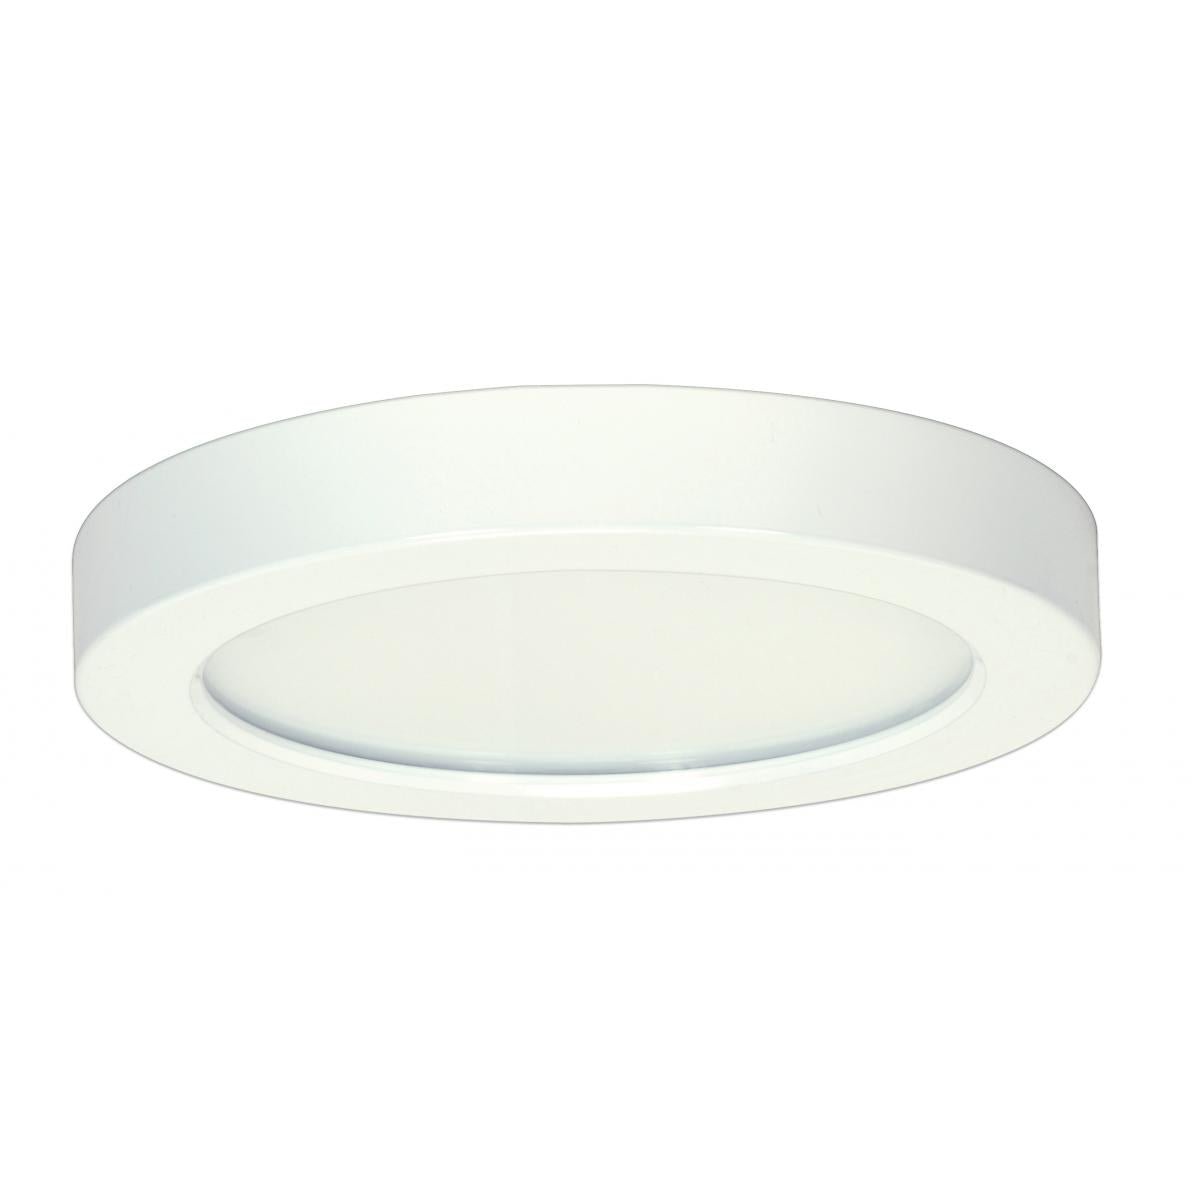 SATCO-S29328SATCO S29328 13.5W 7" Round LED Surface Mount 27K/30K